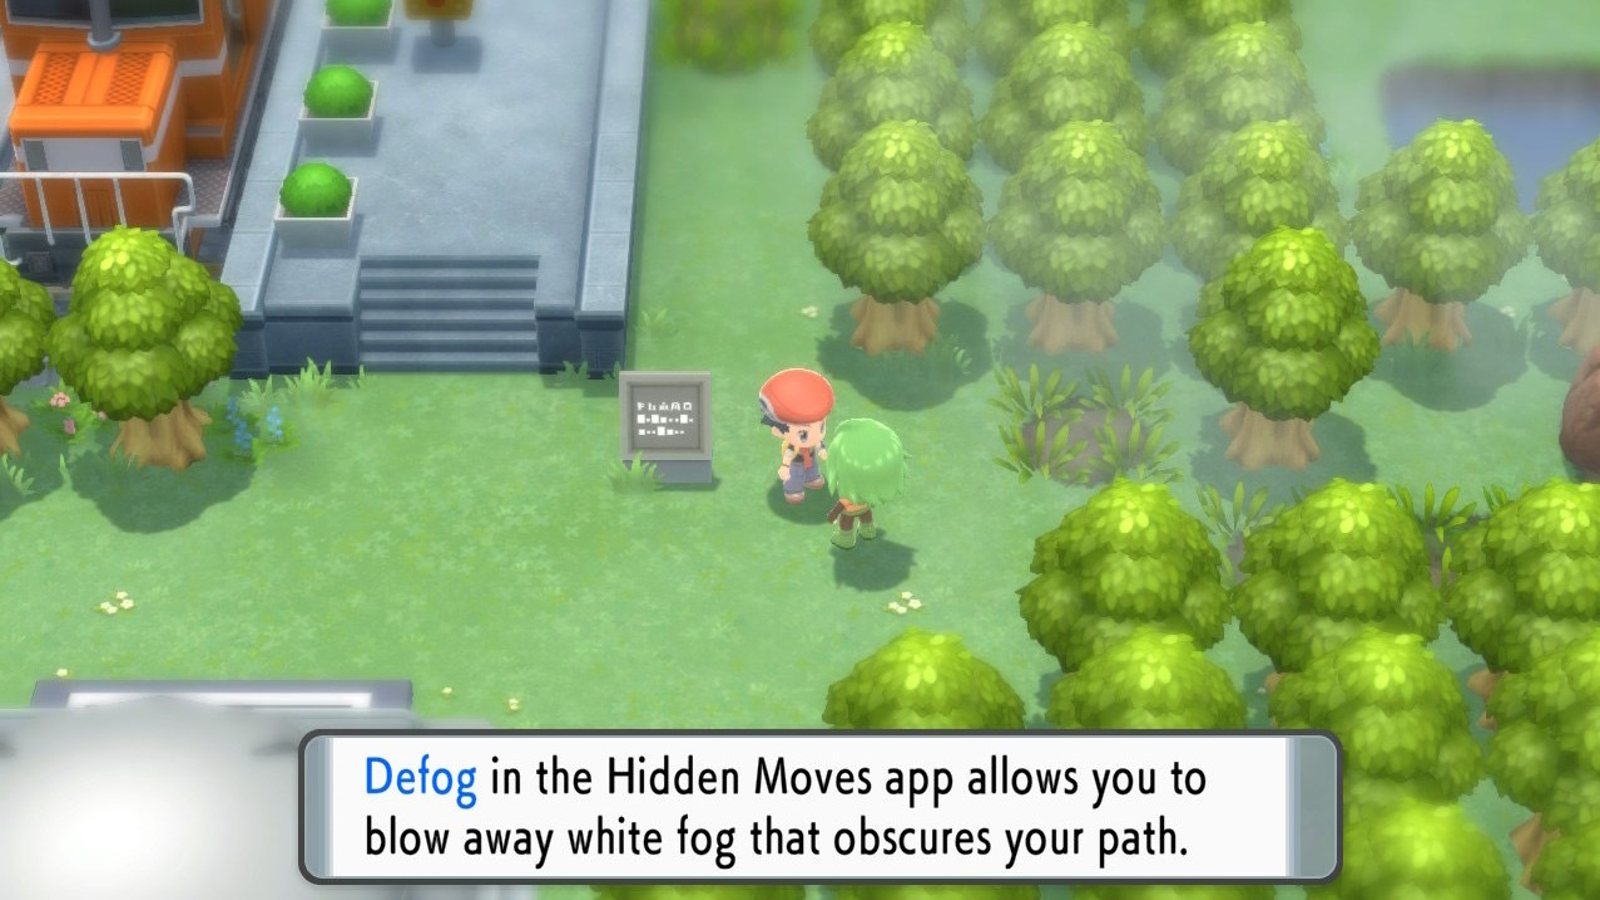 Pokémon BDSP: Where to Find Dawn Stone (& What It's For)